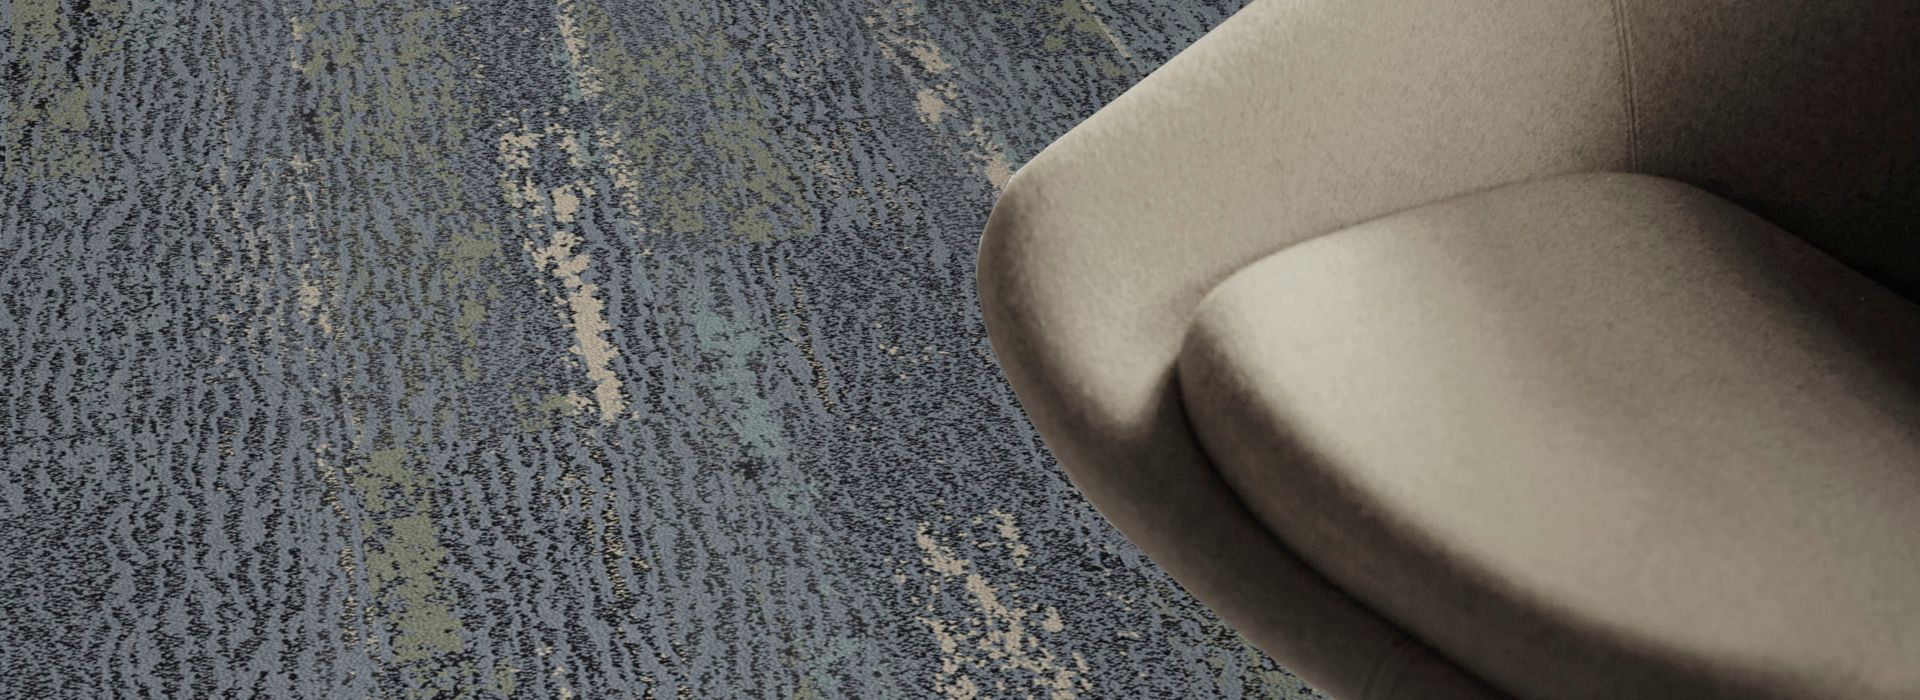 Detail of Interface Uprooted plank carpet tile with chair imagen número 1